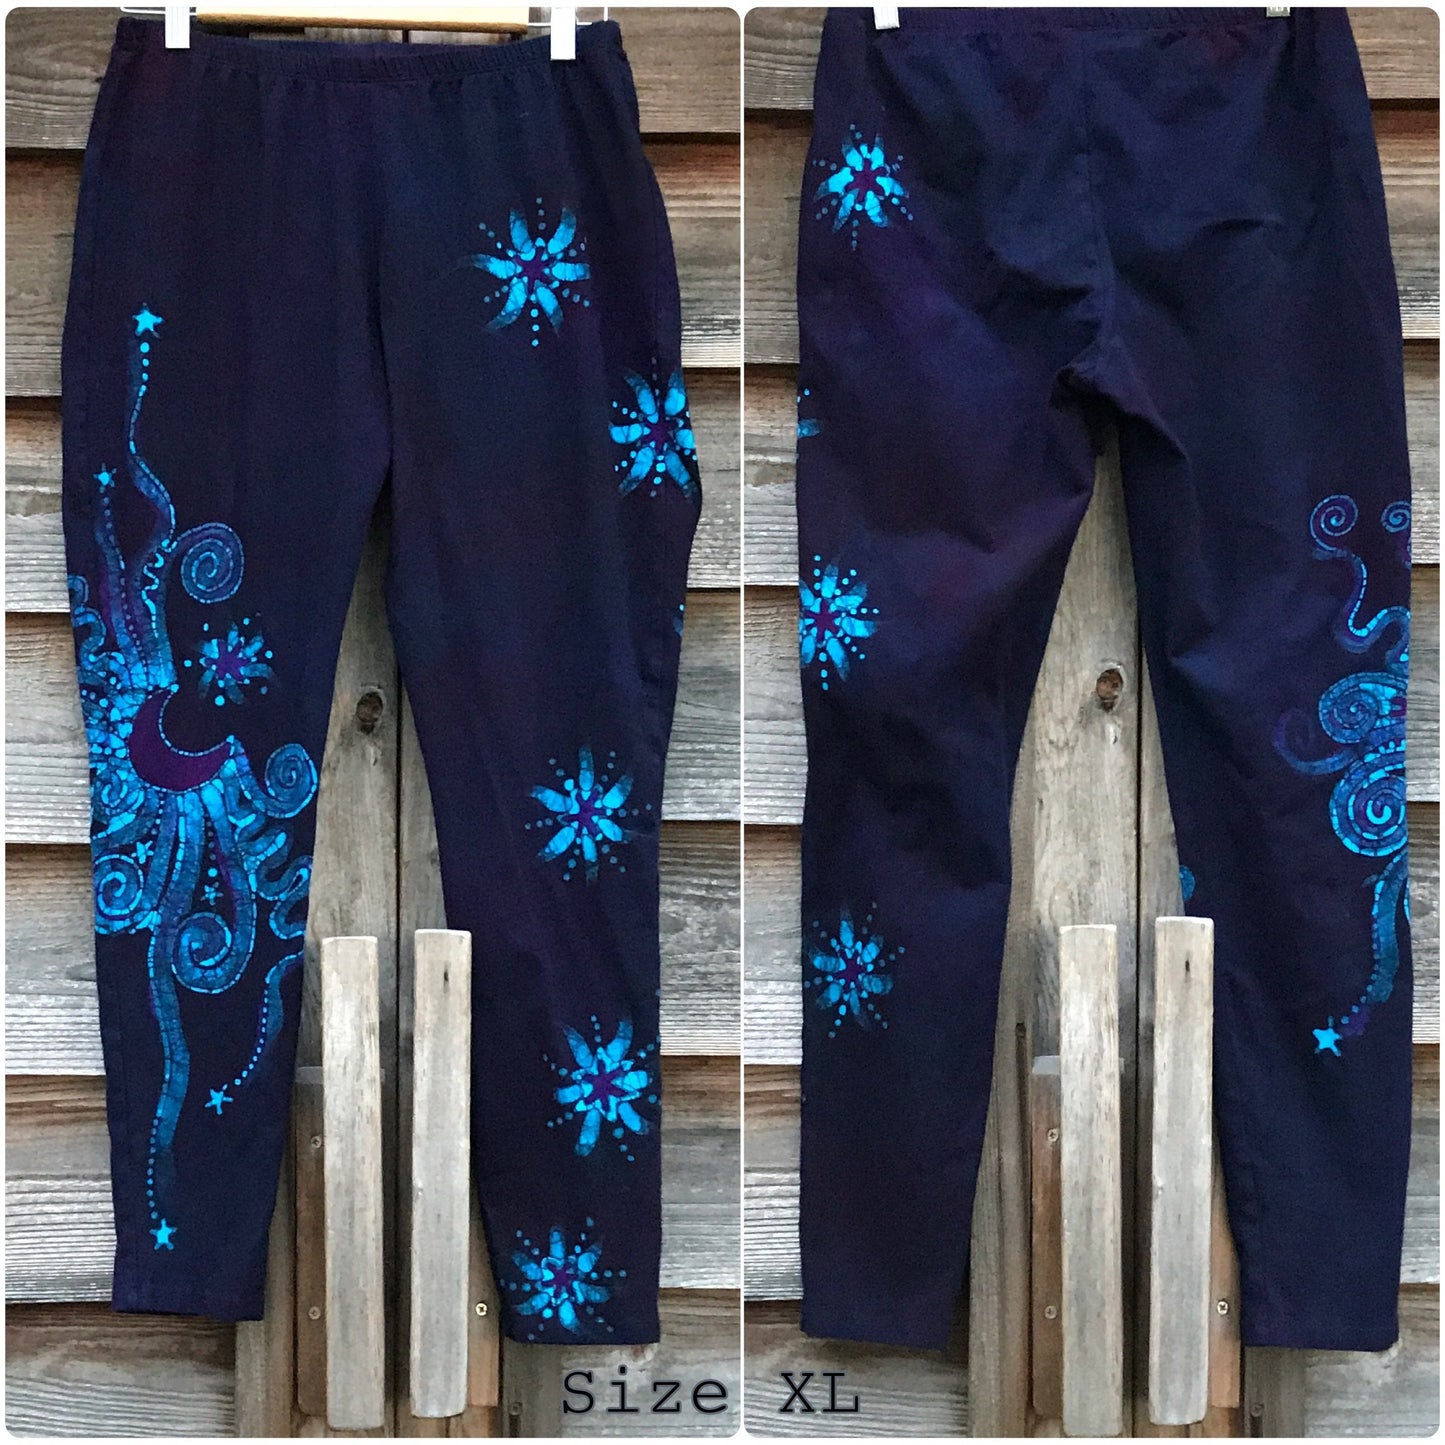 Deep Purple and Turquoise Moon and Star Batik Leggings - Size XL